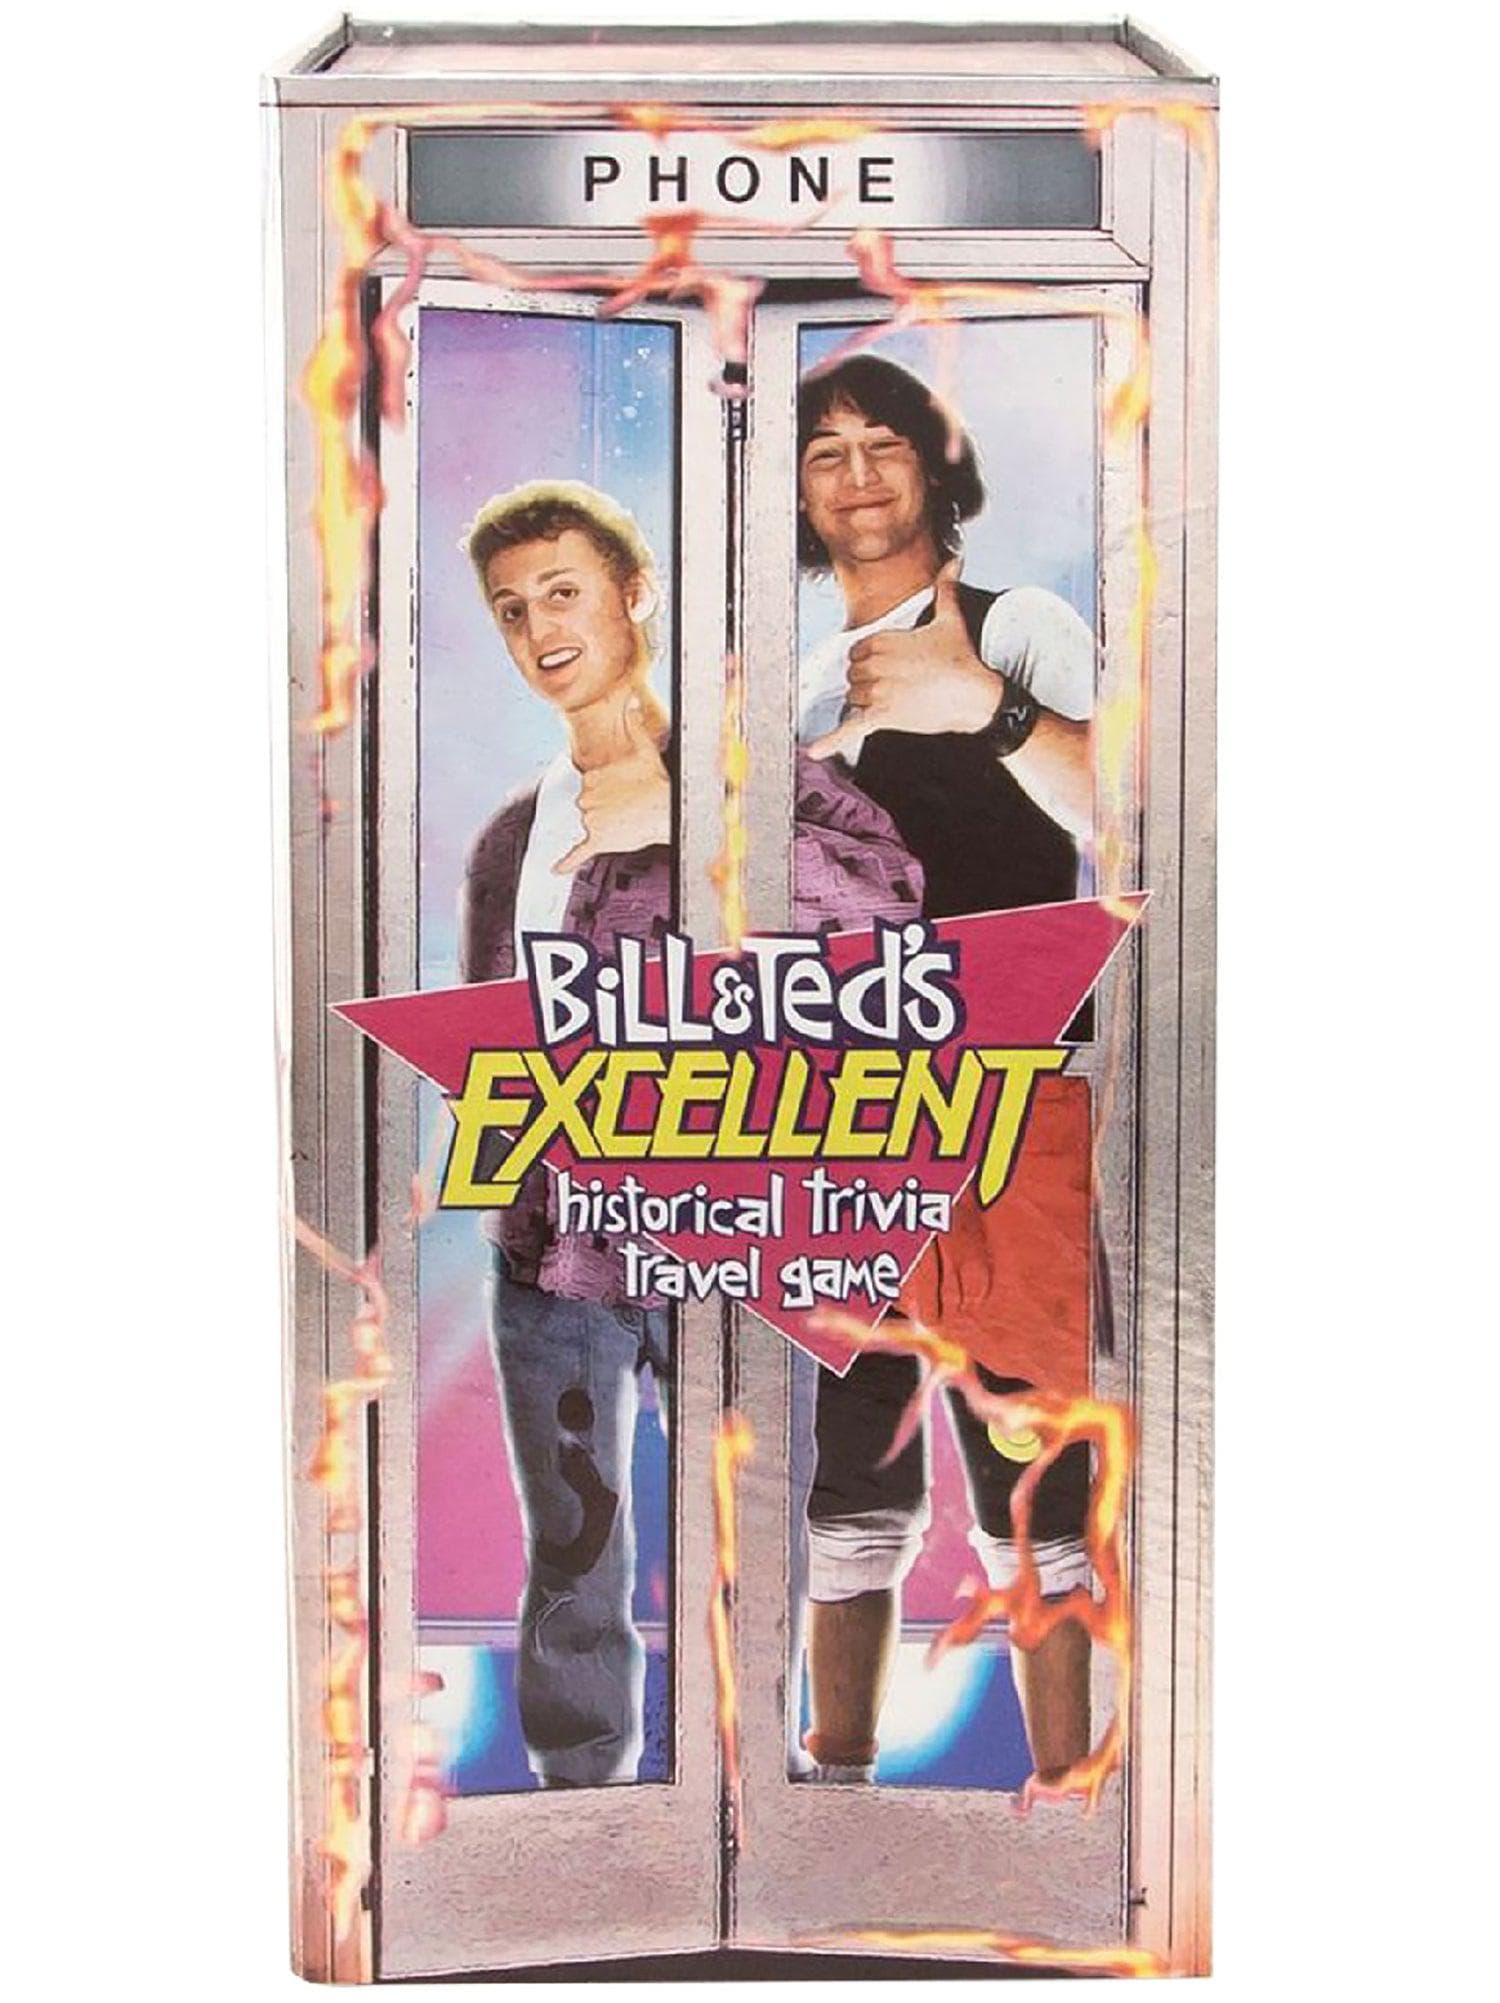 Bill & Ted's Excellent Historical Trivia Travel Game! - costumes.com